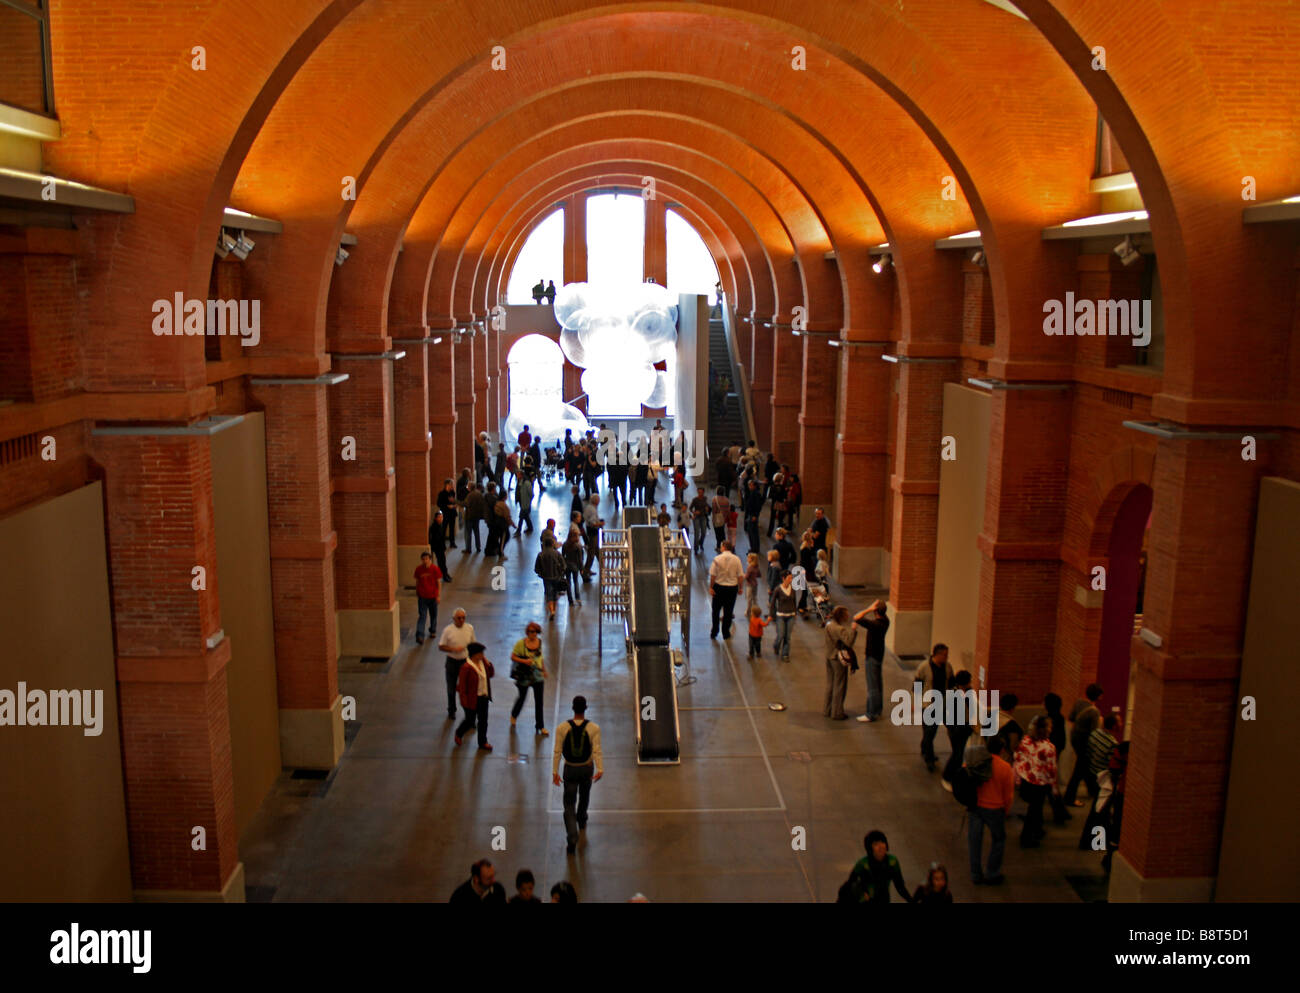 An interior view of people visiting the Musee des Abattoirs, a contemporary art museum in Toulouse, in France. Stock Photo